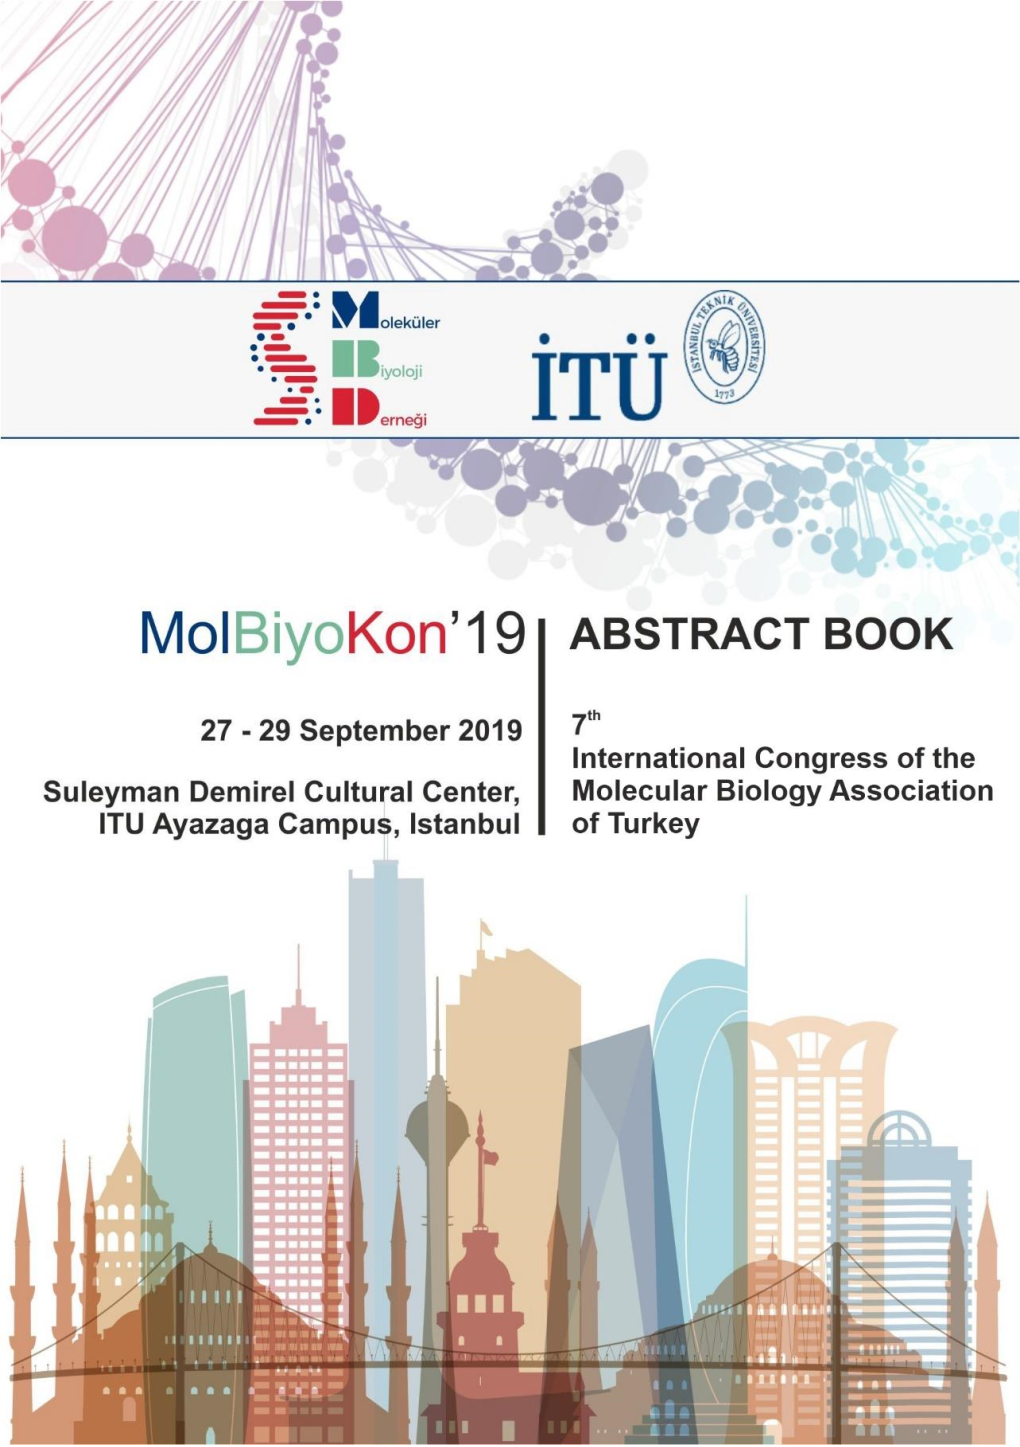 7Th International Congress of the Molecular Biology Association of Turkey 27 - 29 September 2019 Istanbul Technical University TABLE of CONTENTS